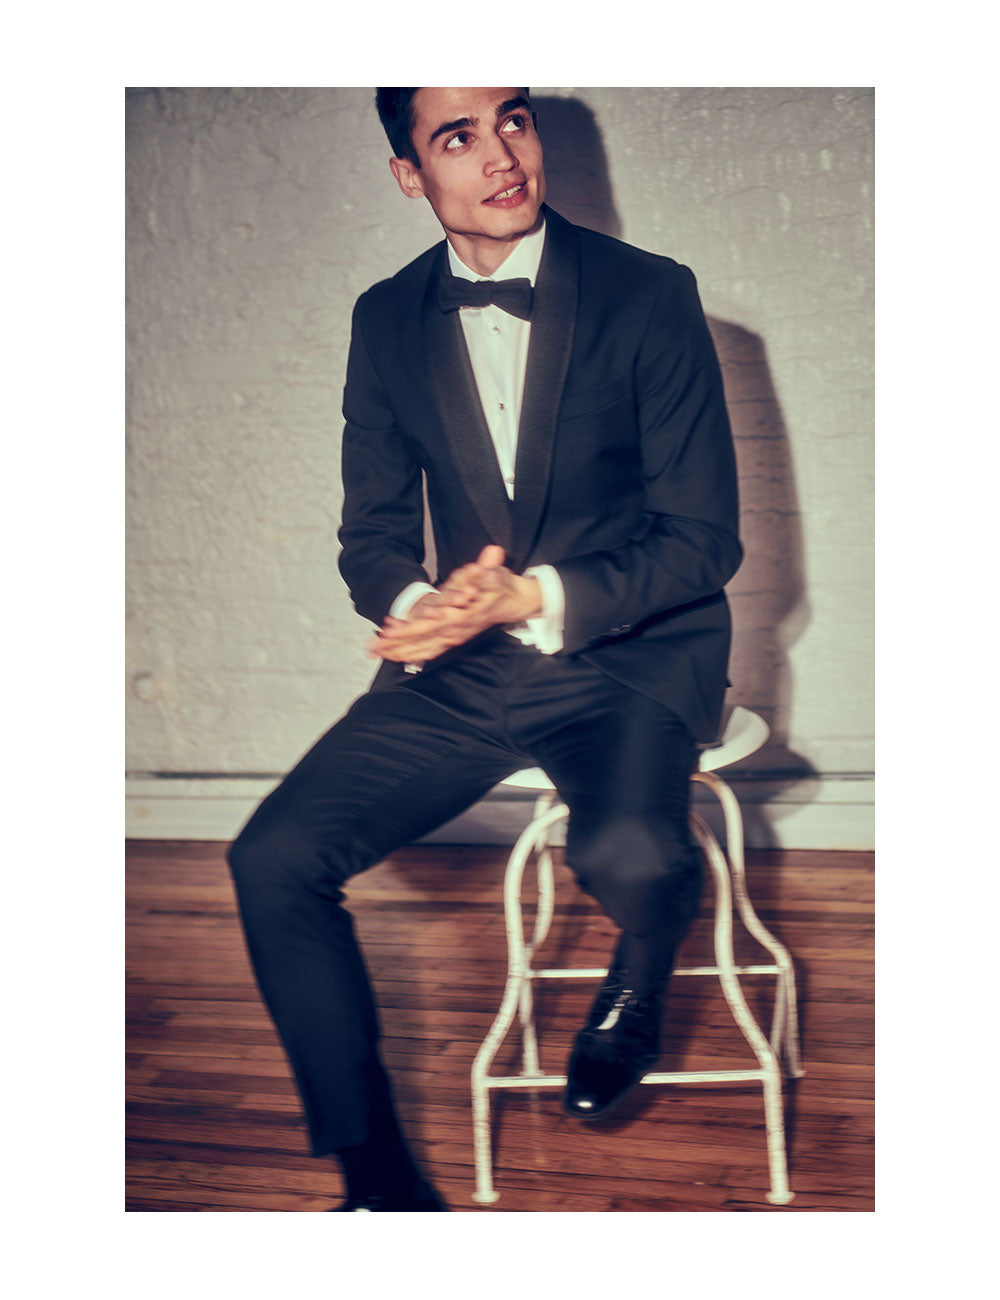 Model wearing a black tuxedo, white tuxedo shirt with dress studs, and black bow tie. He is sitting on a white stool.